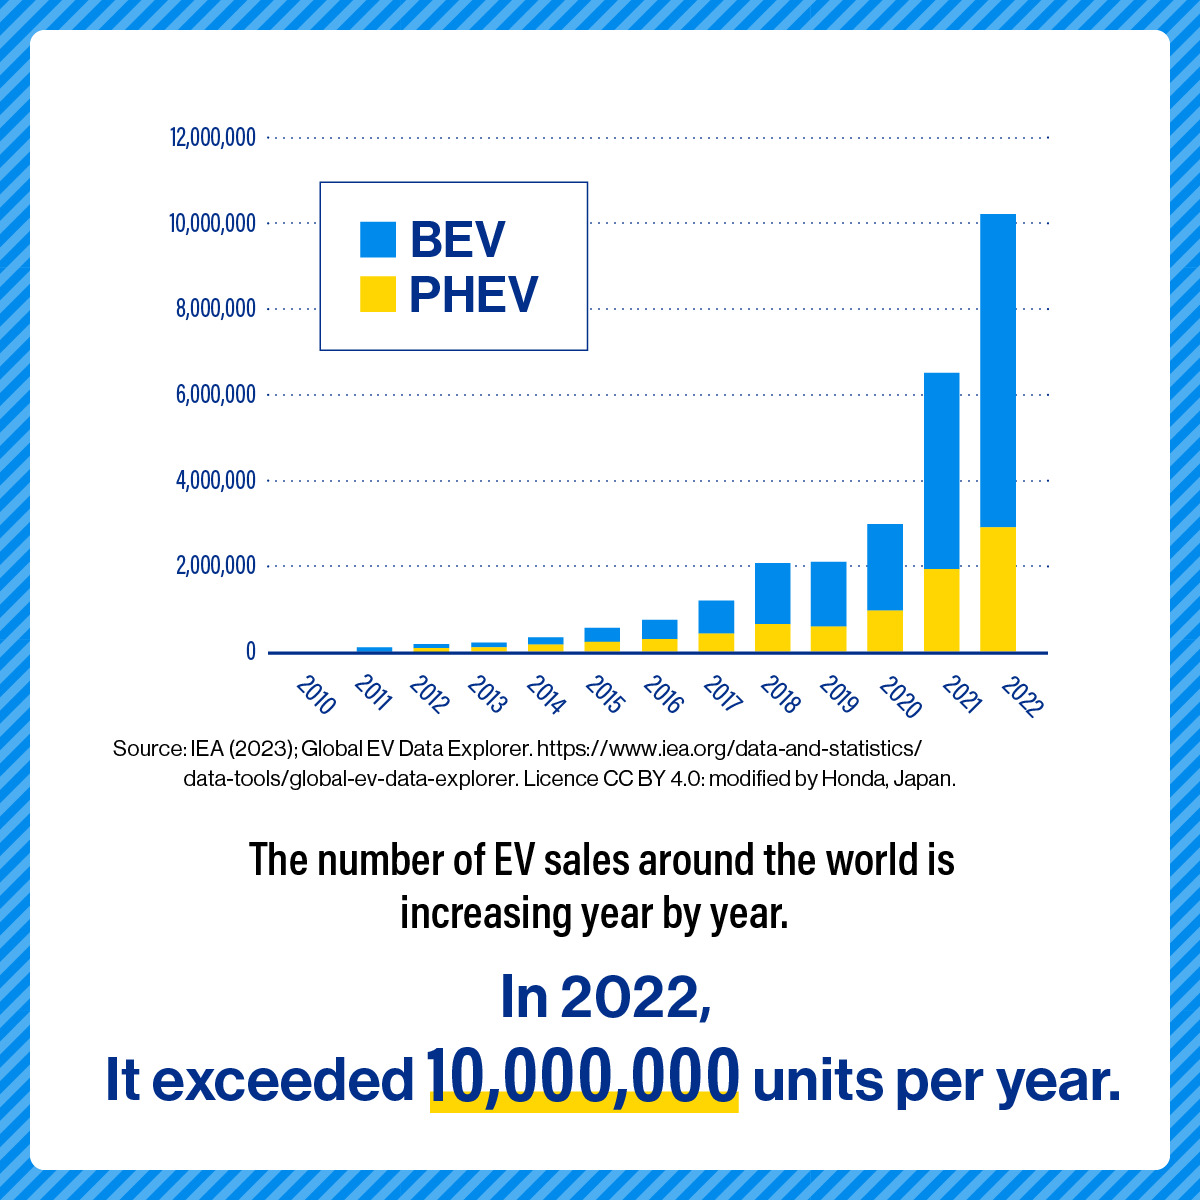 In 2022, the number of EV sales around the world exceeded 10,000,000 units